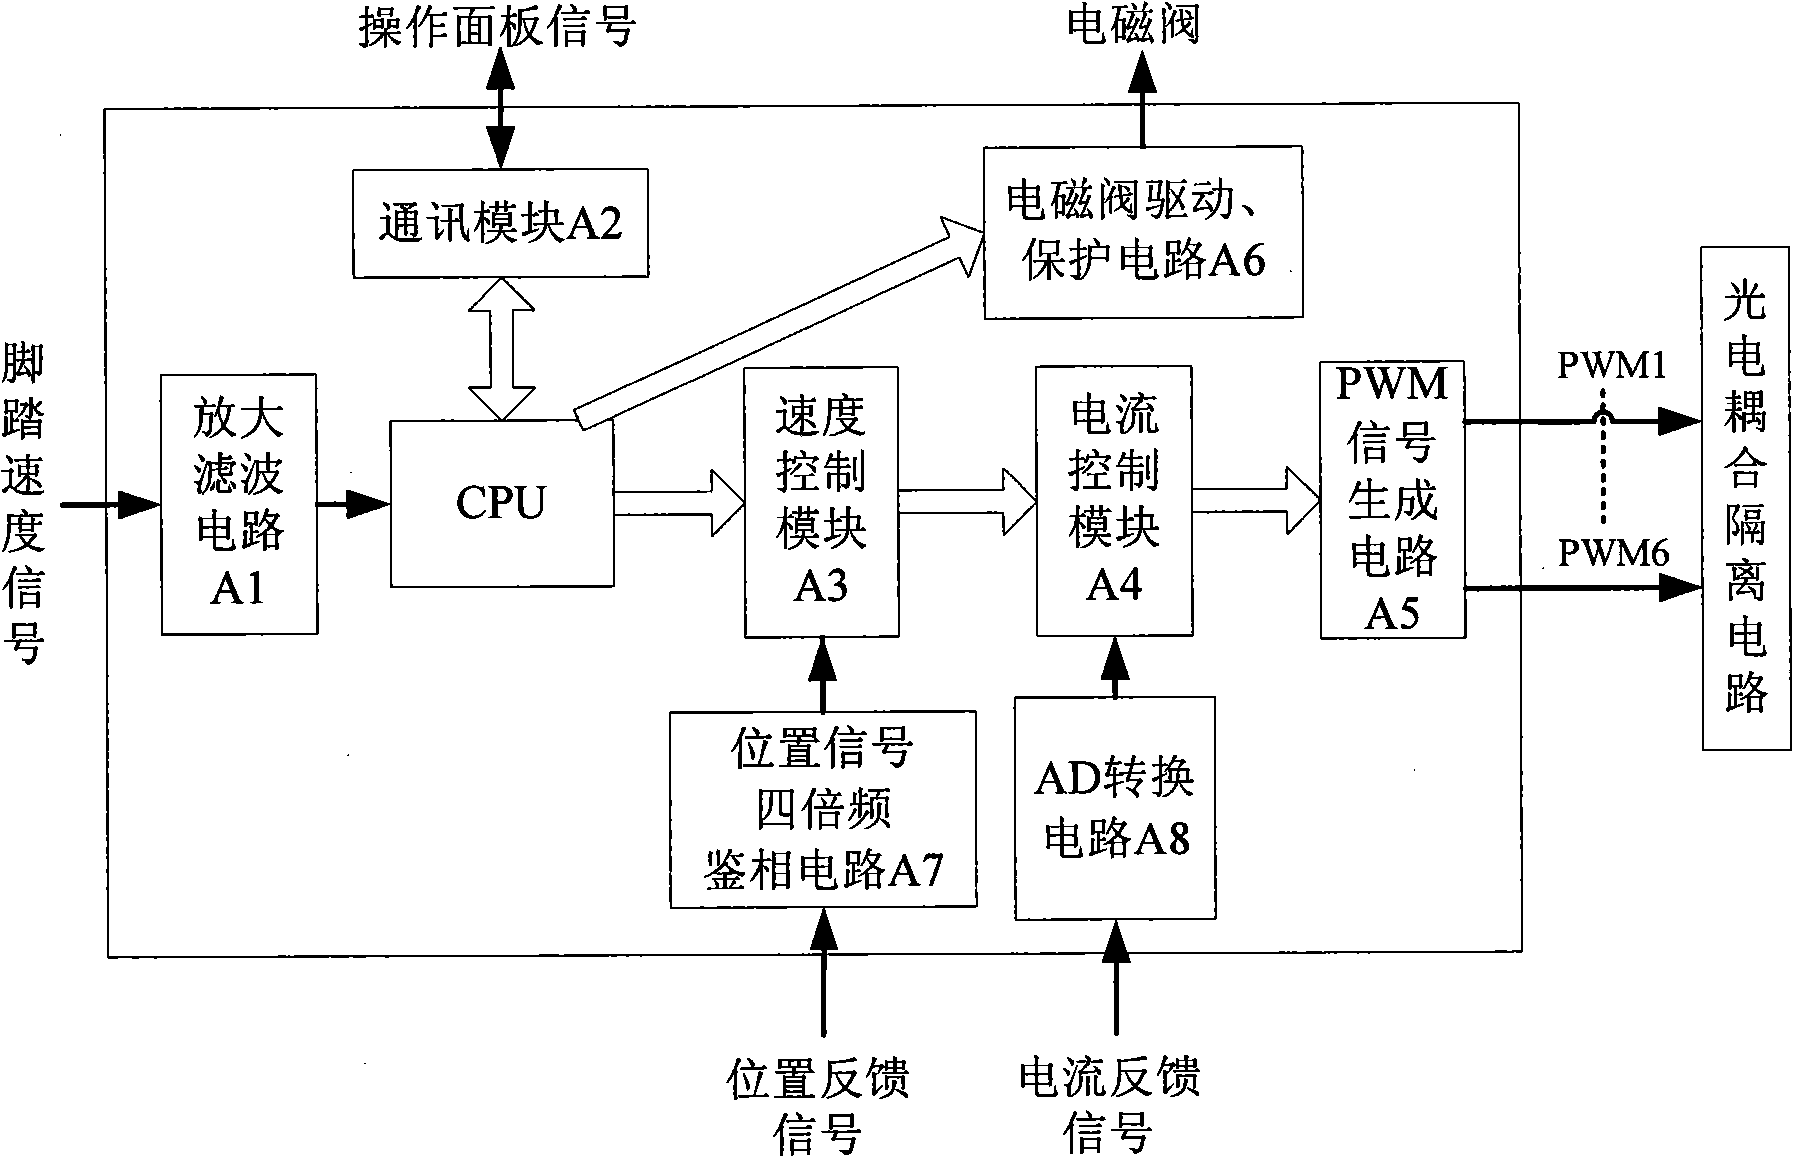 Computer control system for novel direct drive lockstitch sewing machine